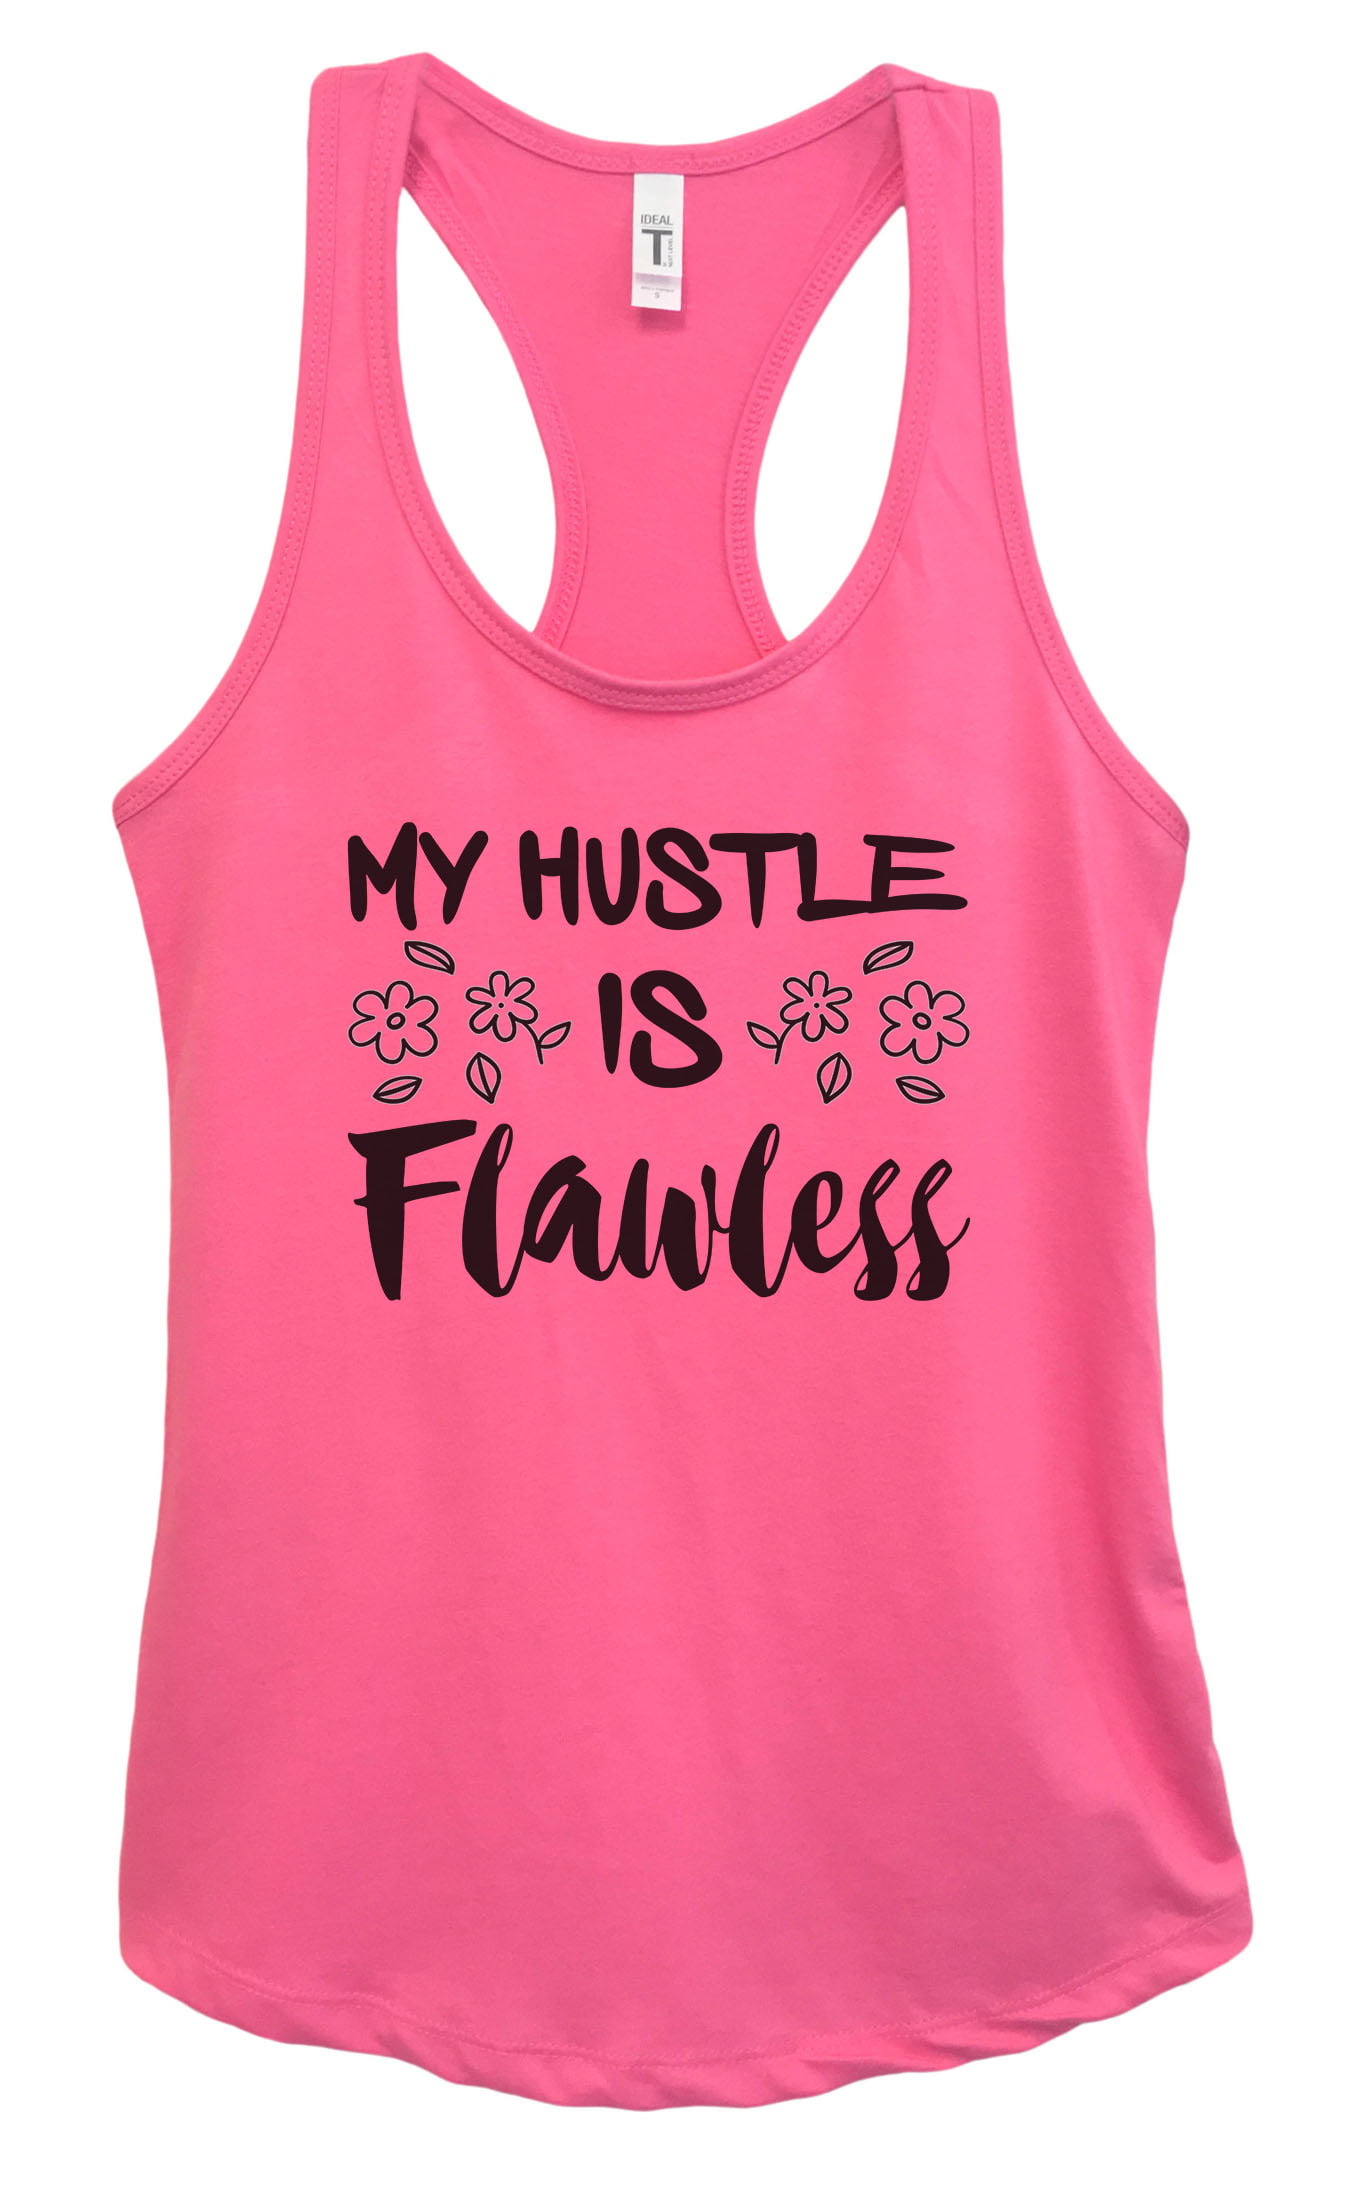 6 Day Funny Workout Tanks For Ladies for Push Pull Legs